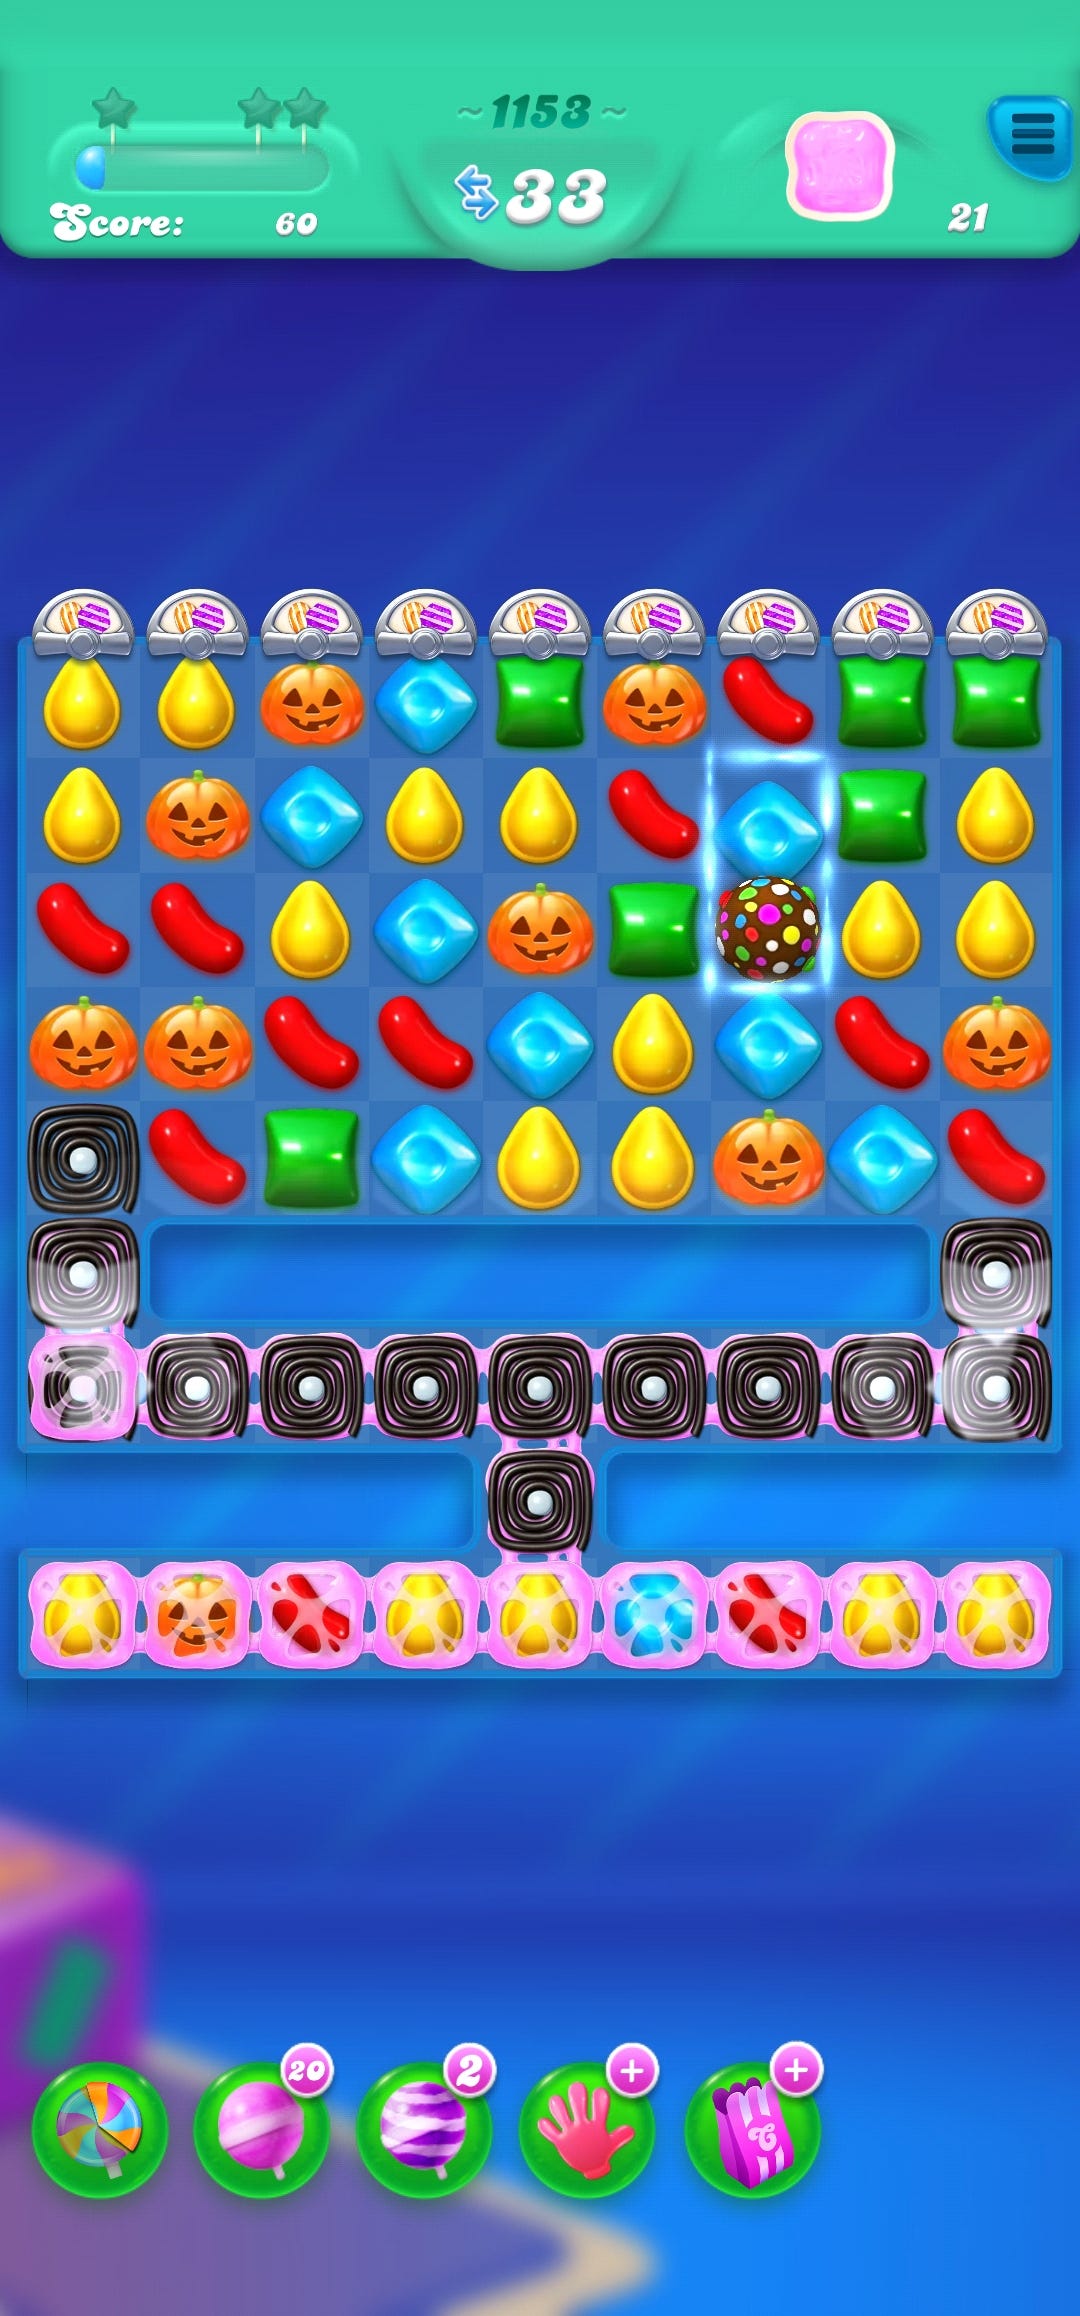 Screen Shot from my phone of level 1100something of Candy Crush Soda